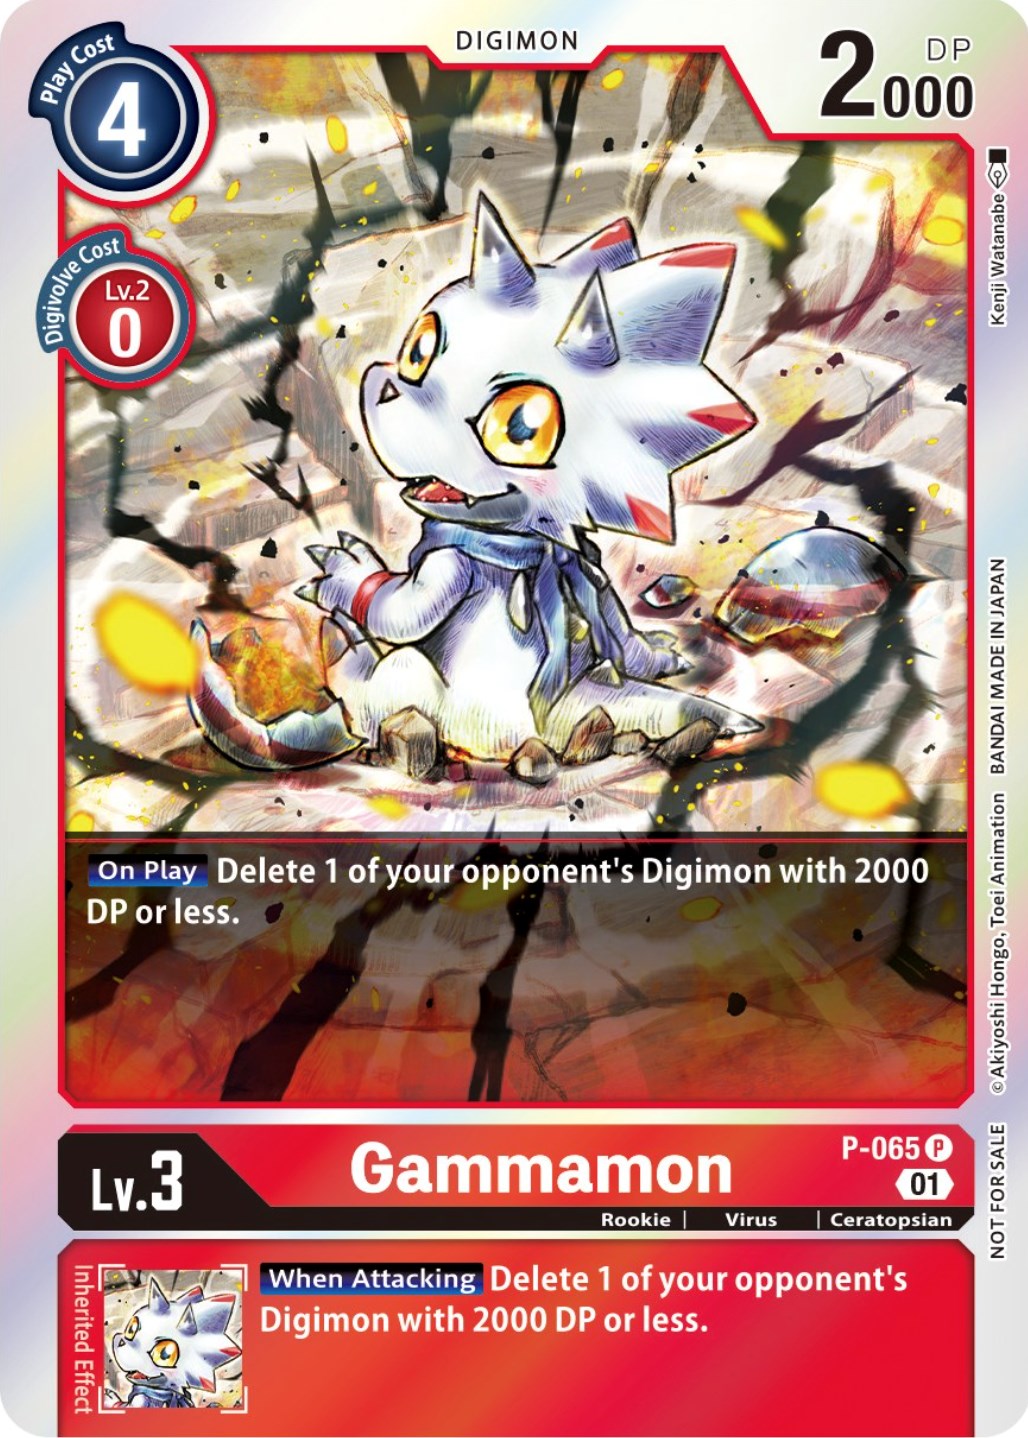 Gammamon [P-065] (ST-11 Special Entry Pack) [Promotional Cards] | Play N Trade Winnipeg